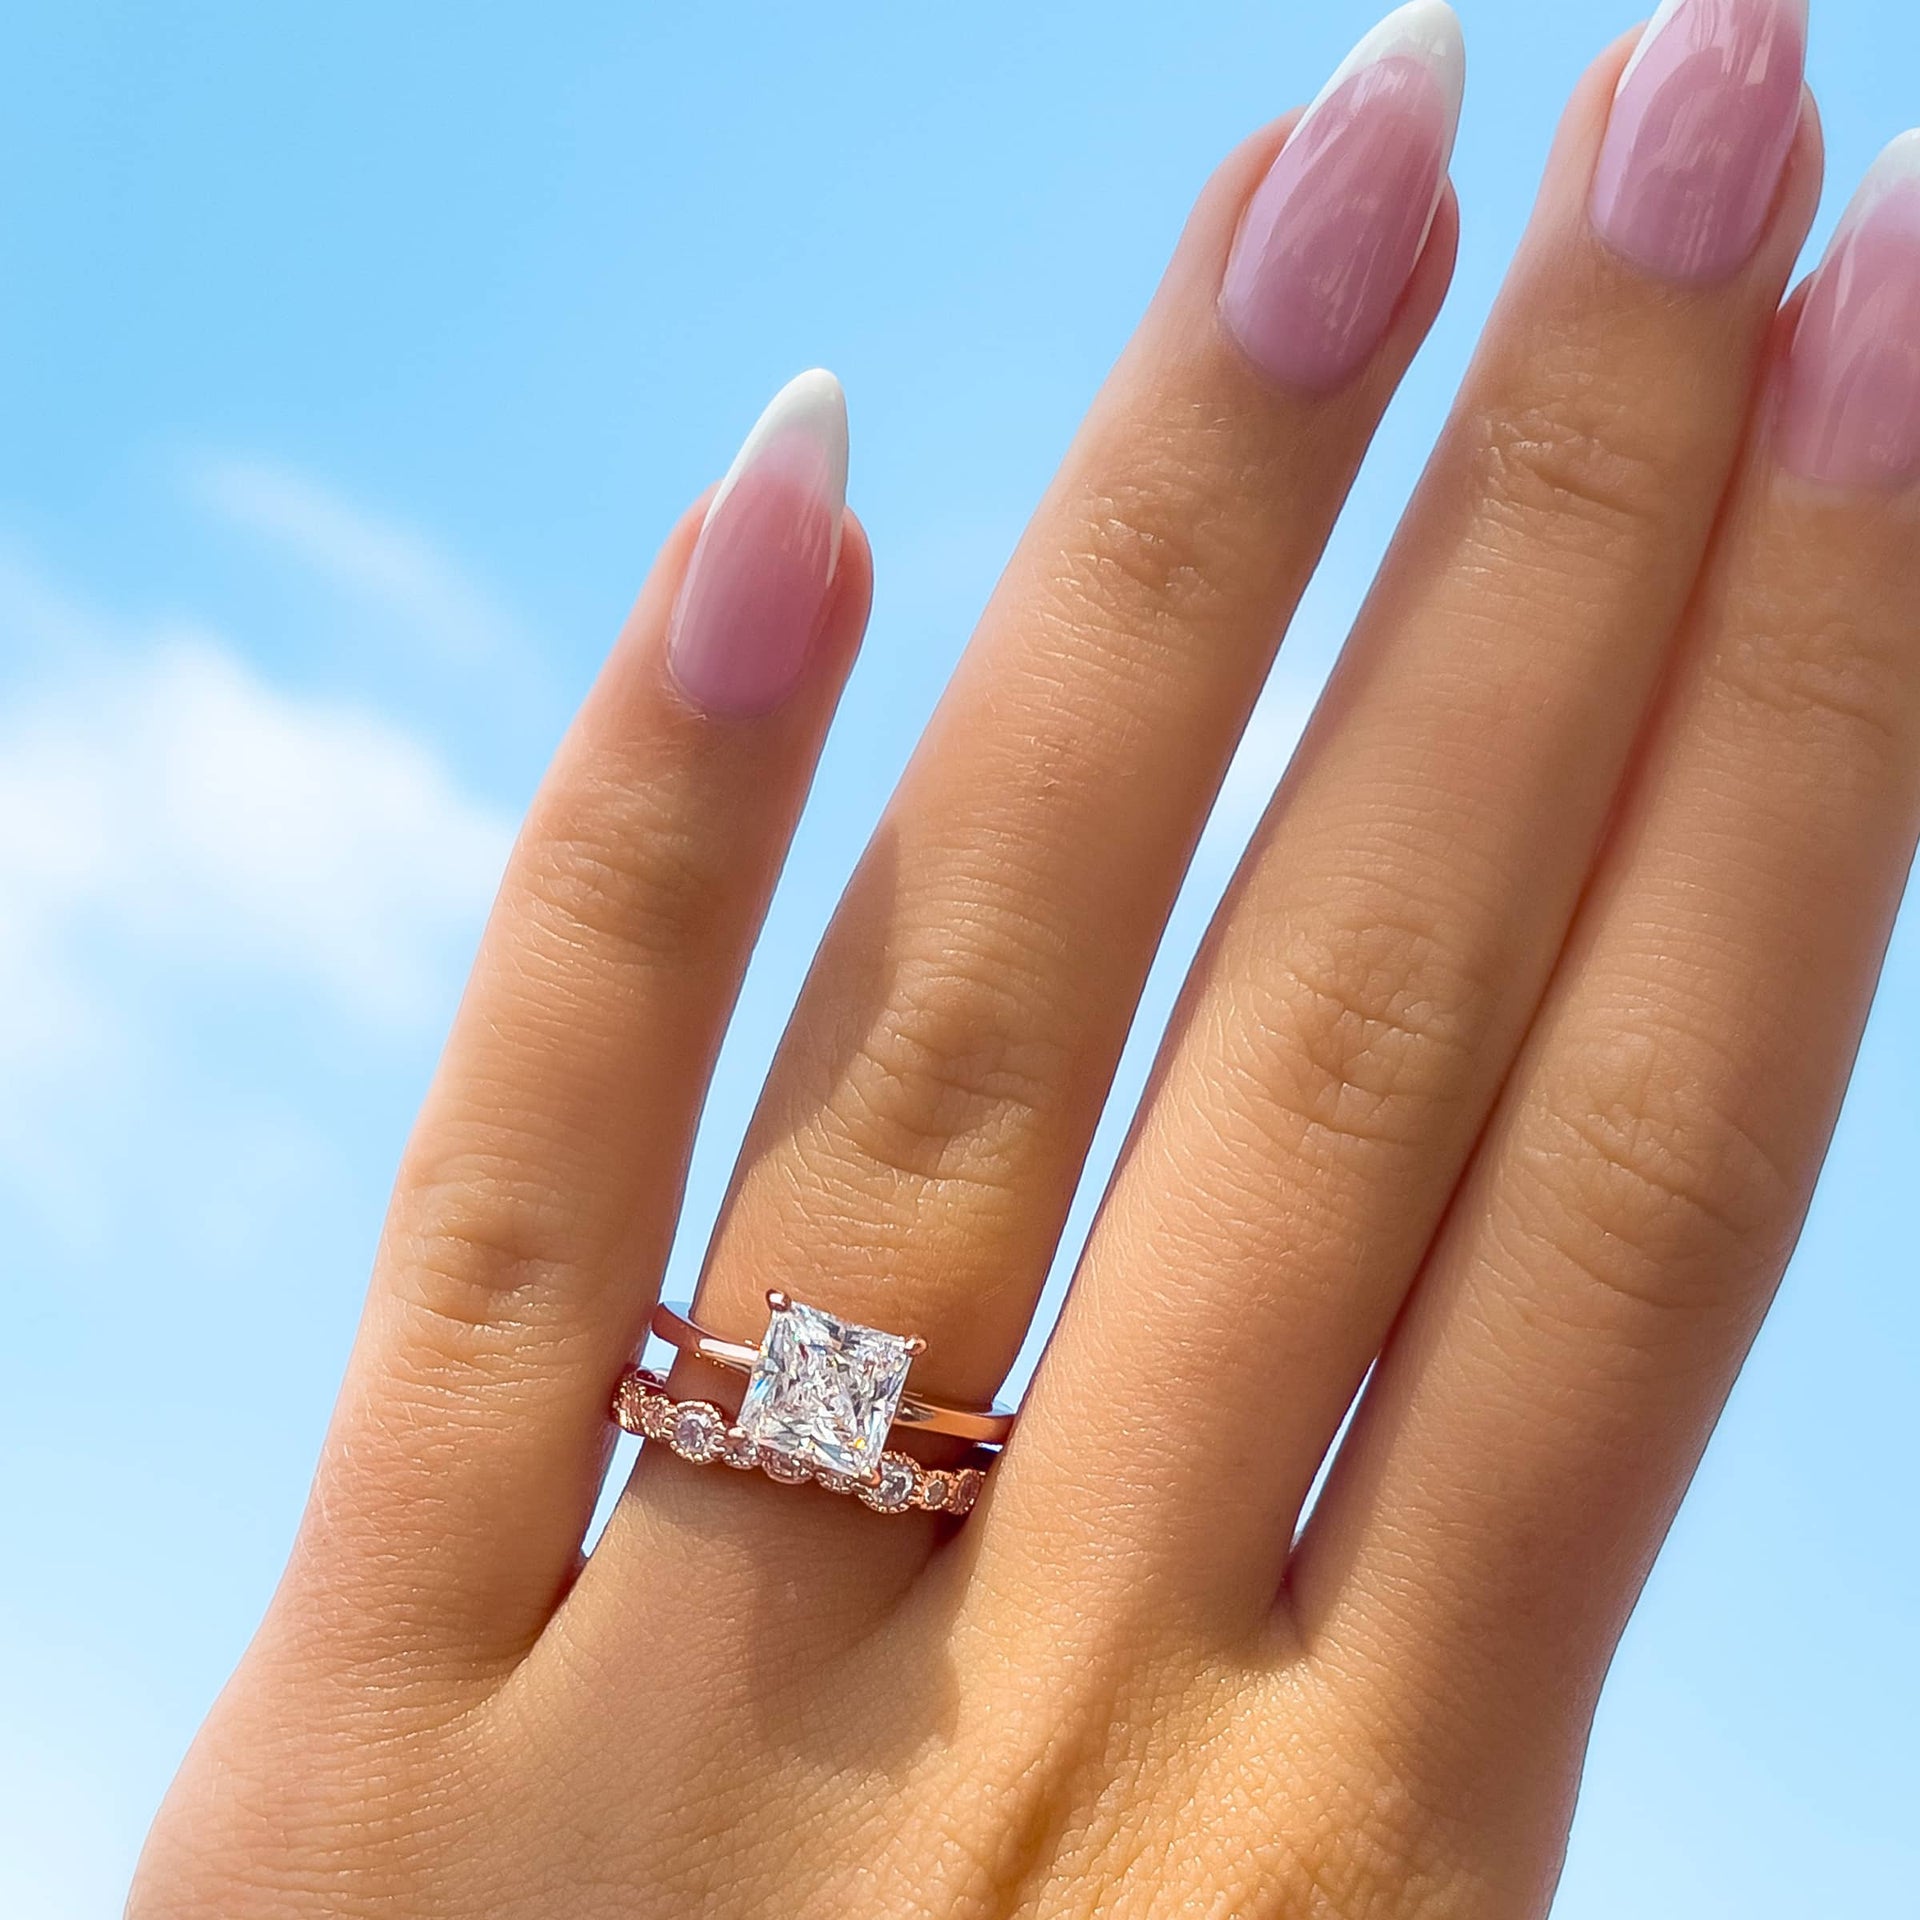 classic rose gold 2 carat princess cut solitaire engagement ring paired with unique rose gold wedding band on model with french tip nails